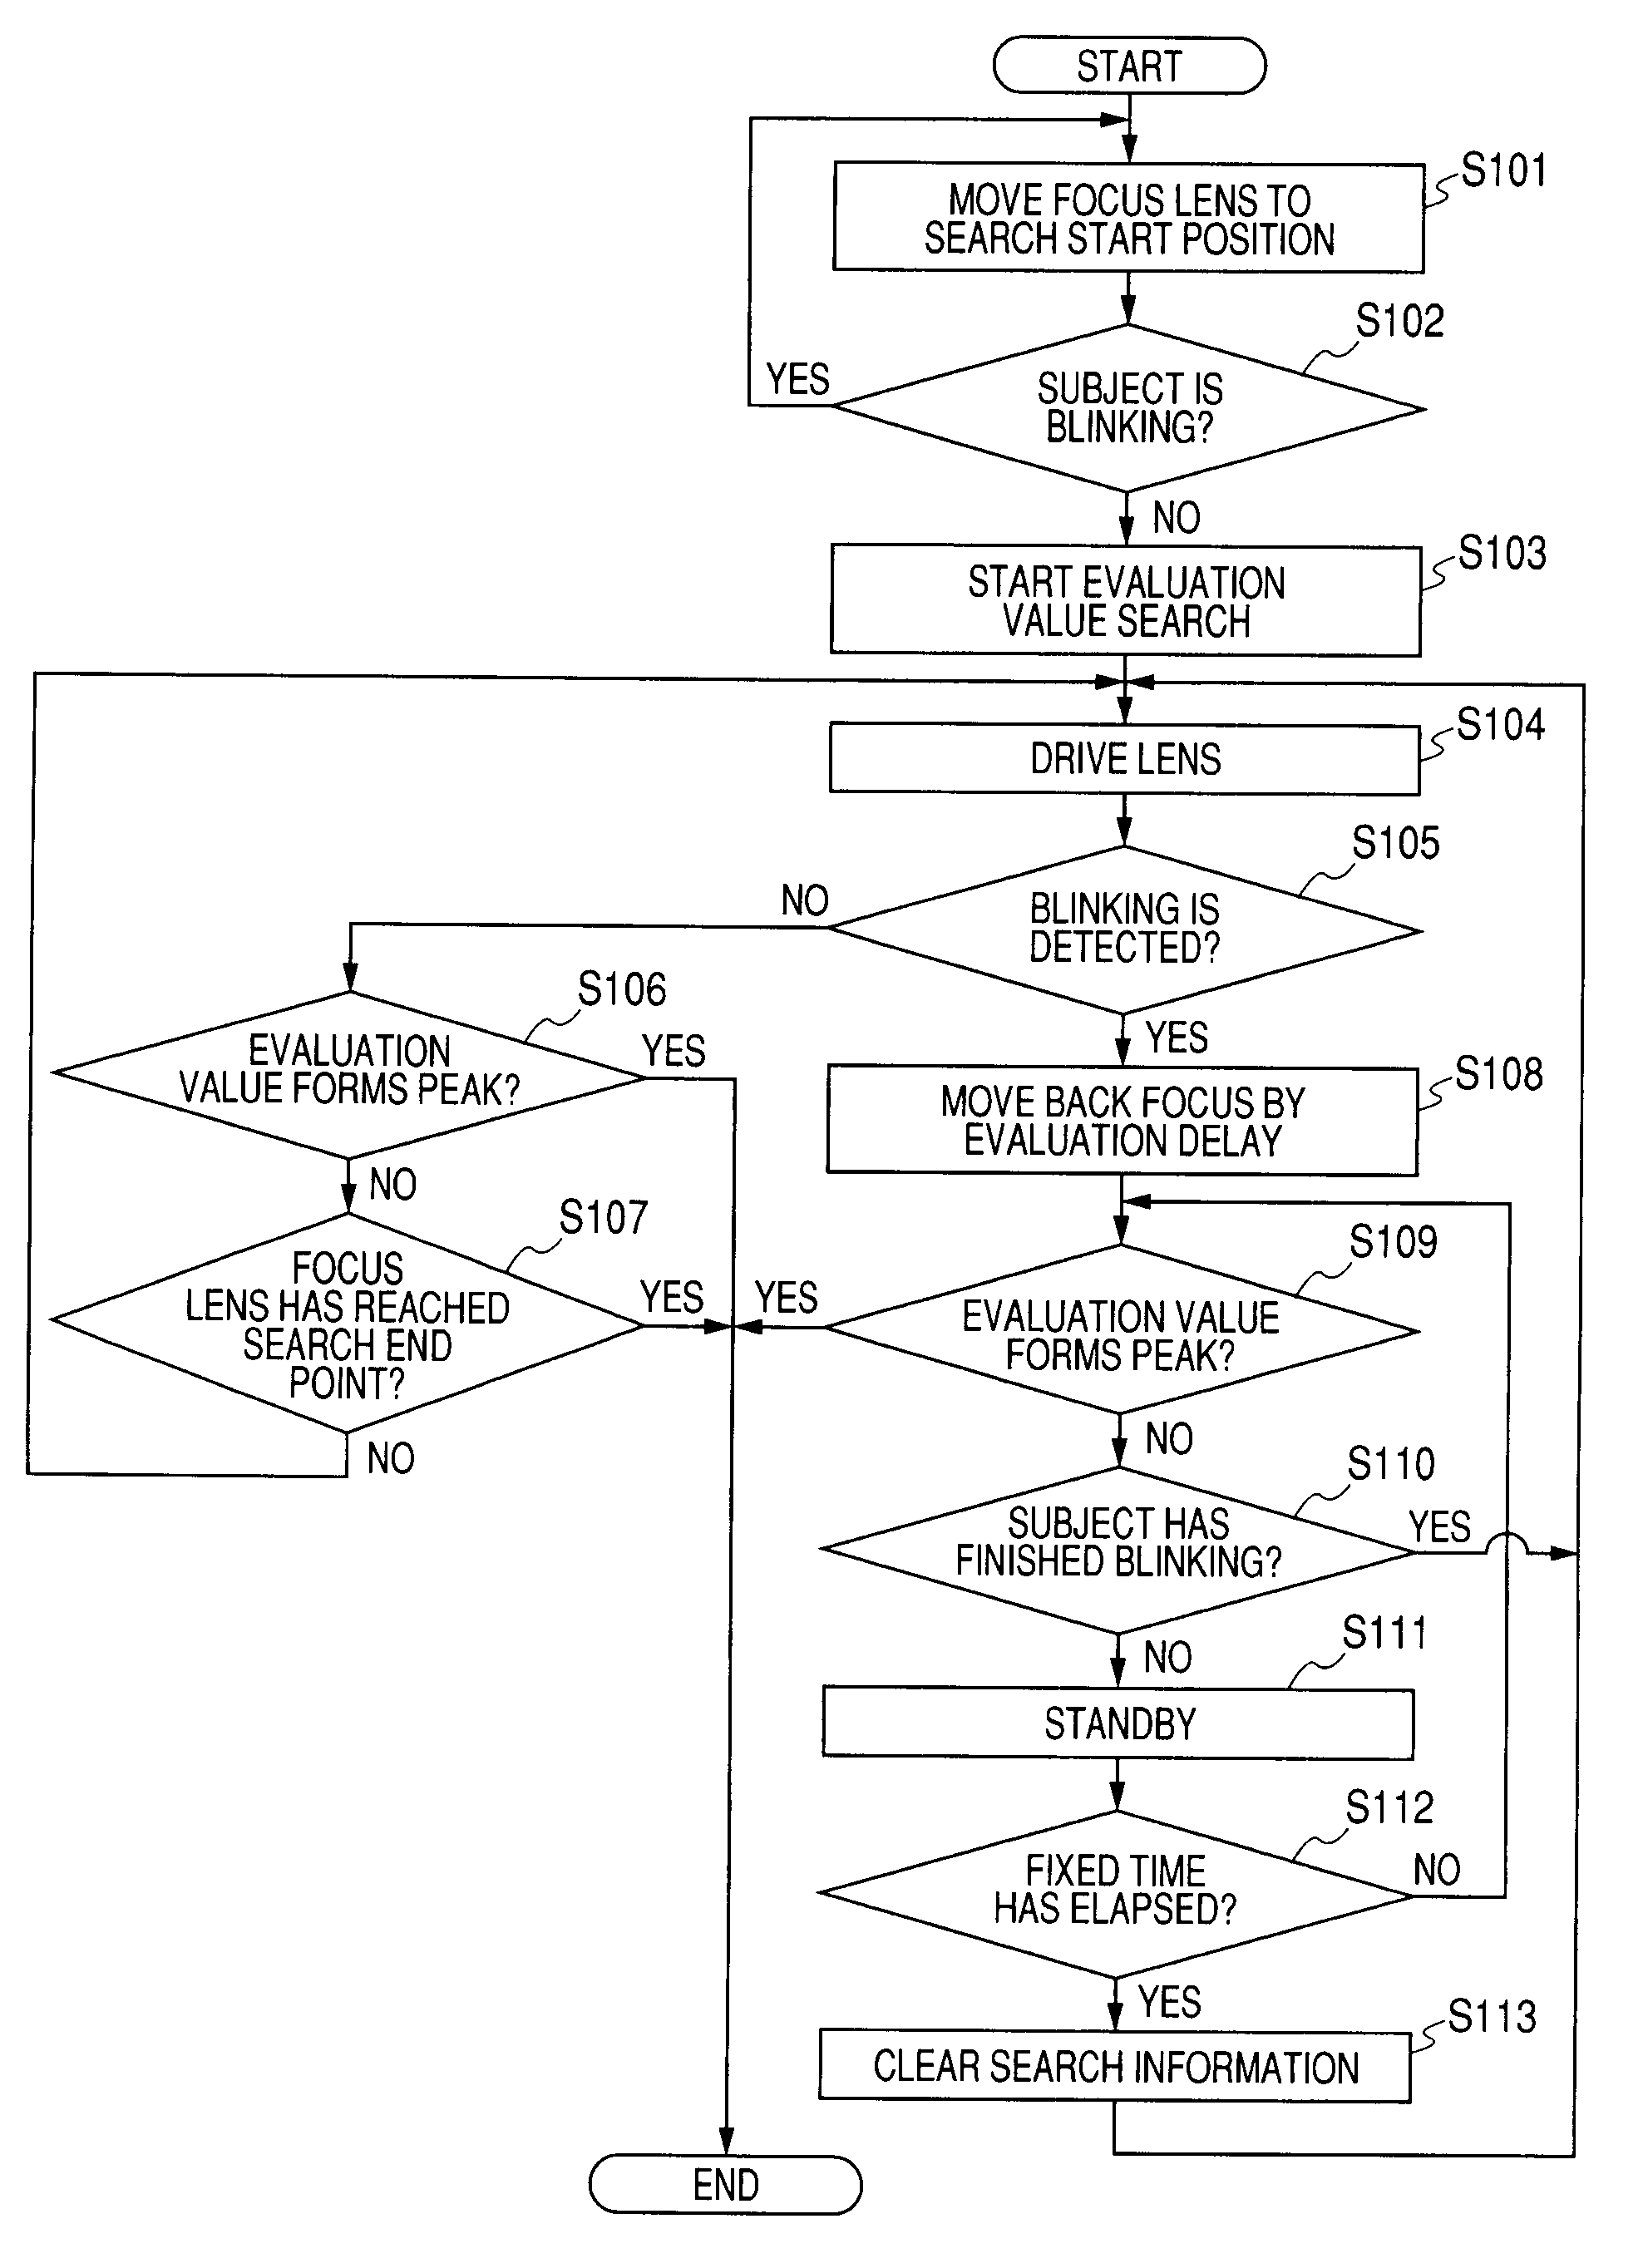 Imaging apparatus, imaging apparatus control method and computer program product, with eye blink detection features